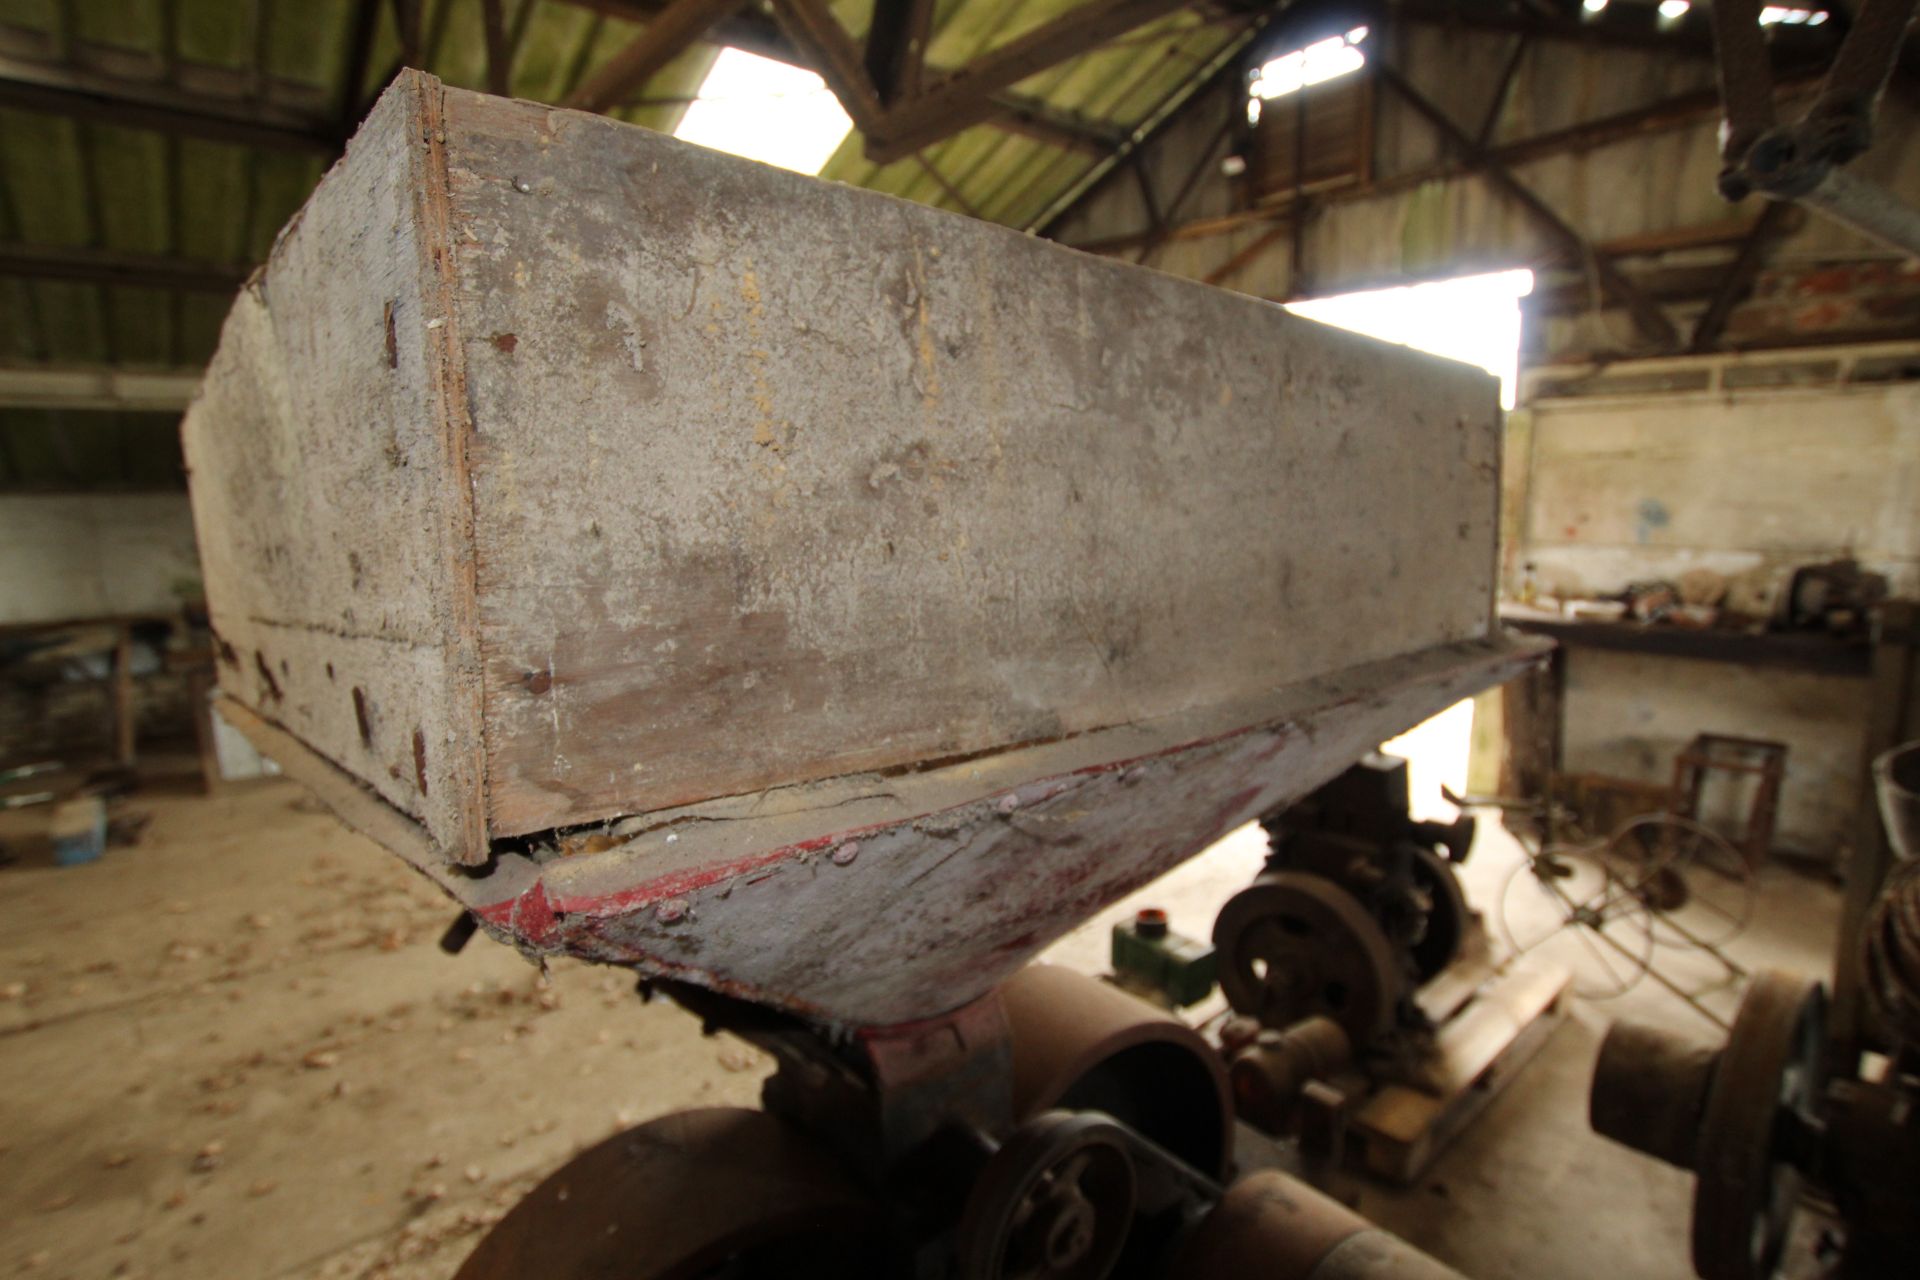 Bentall roller mill with hopper. To be sold in situ and removed at purchaser’s expense. - Image 8 of 10